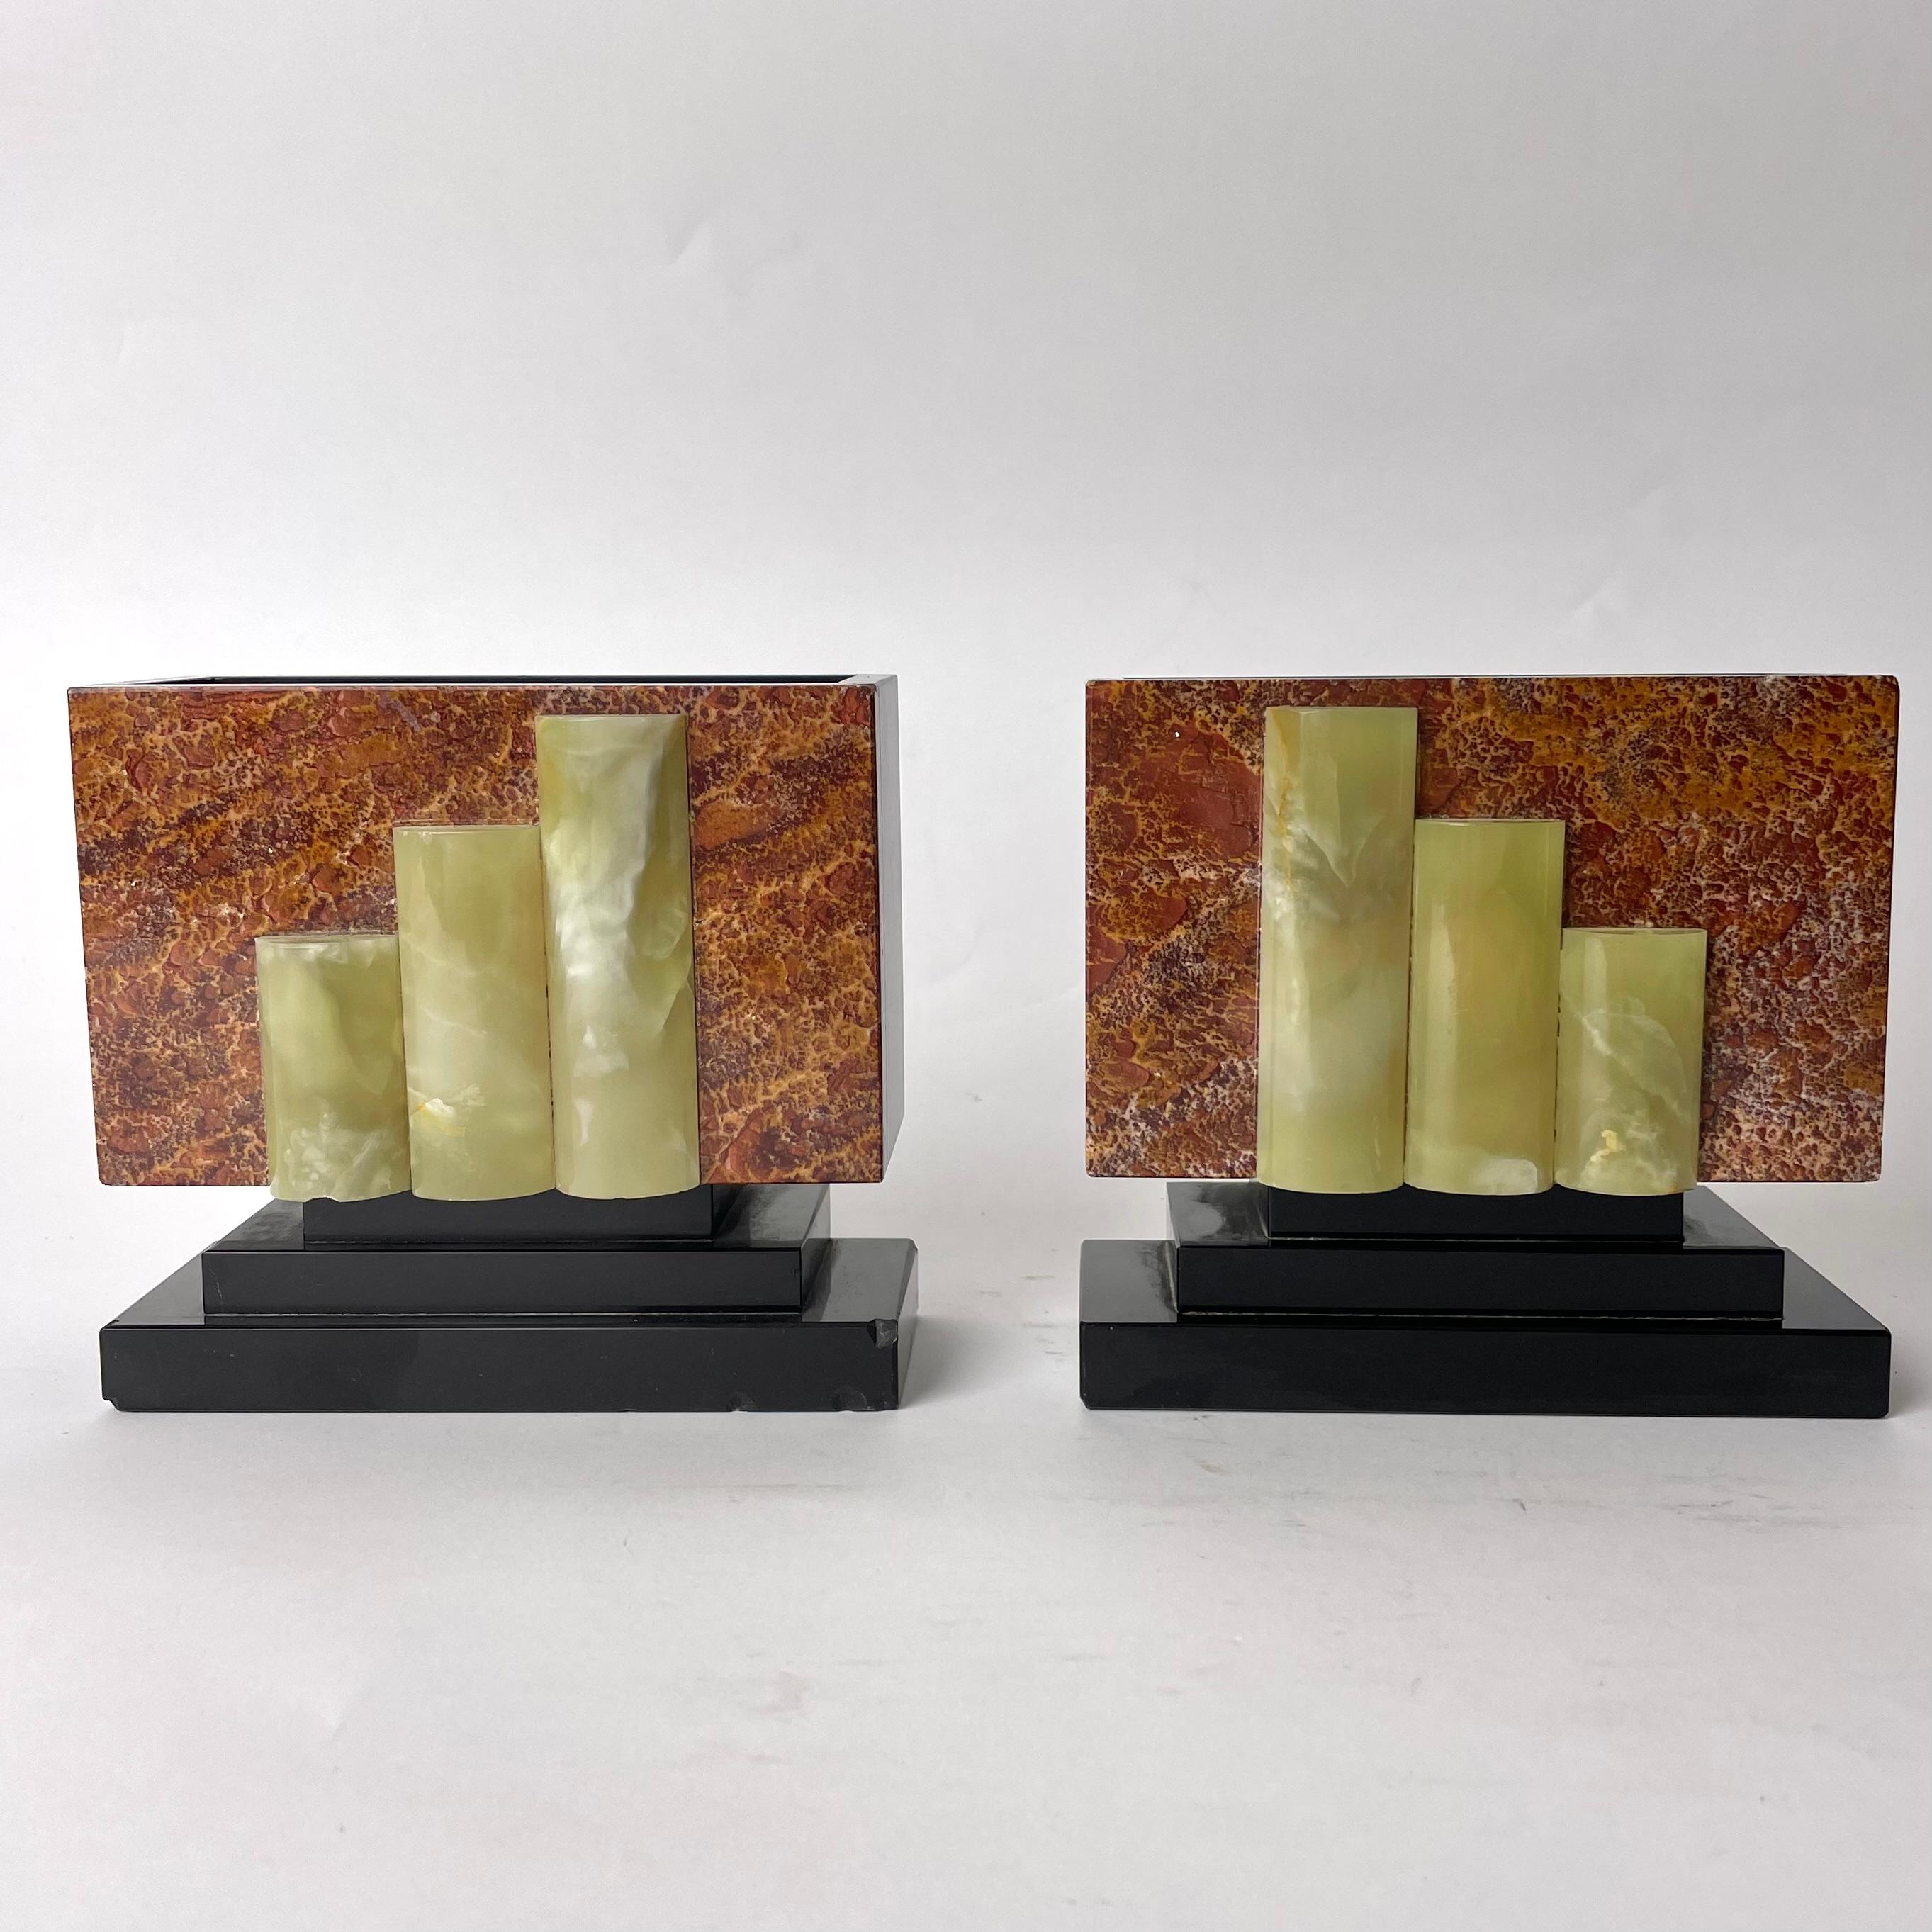 Elegant Art Deco Bookstands, Featuring 3 Marble Types, 1920s-1930s

These elegant and refined bookstands in 1920s or 1930s Art Deco reflect the sensibilities of the period, that being a fascination for the pure form as well as exclusivity in